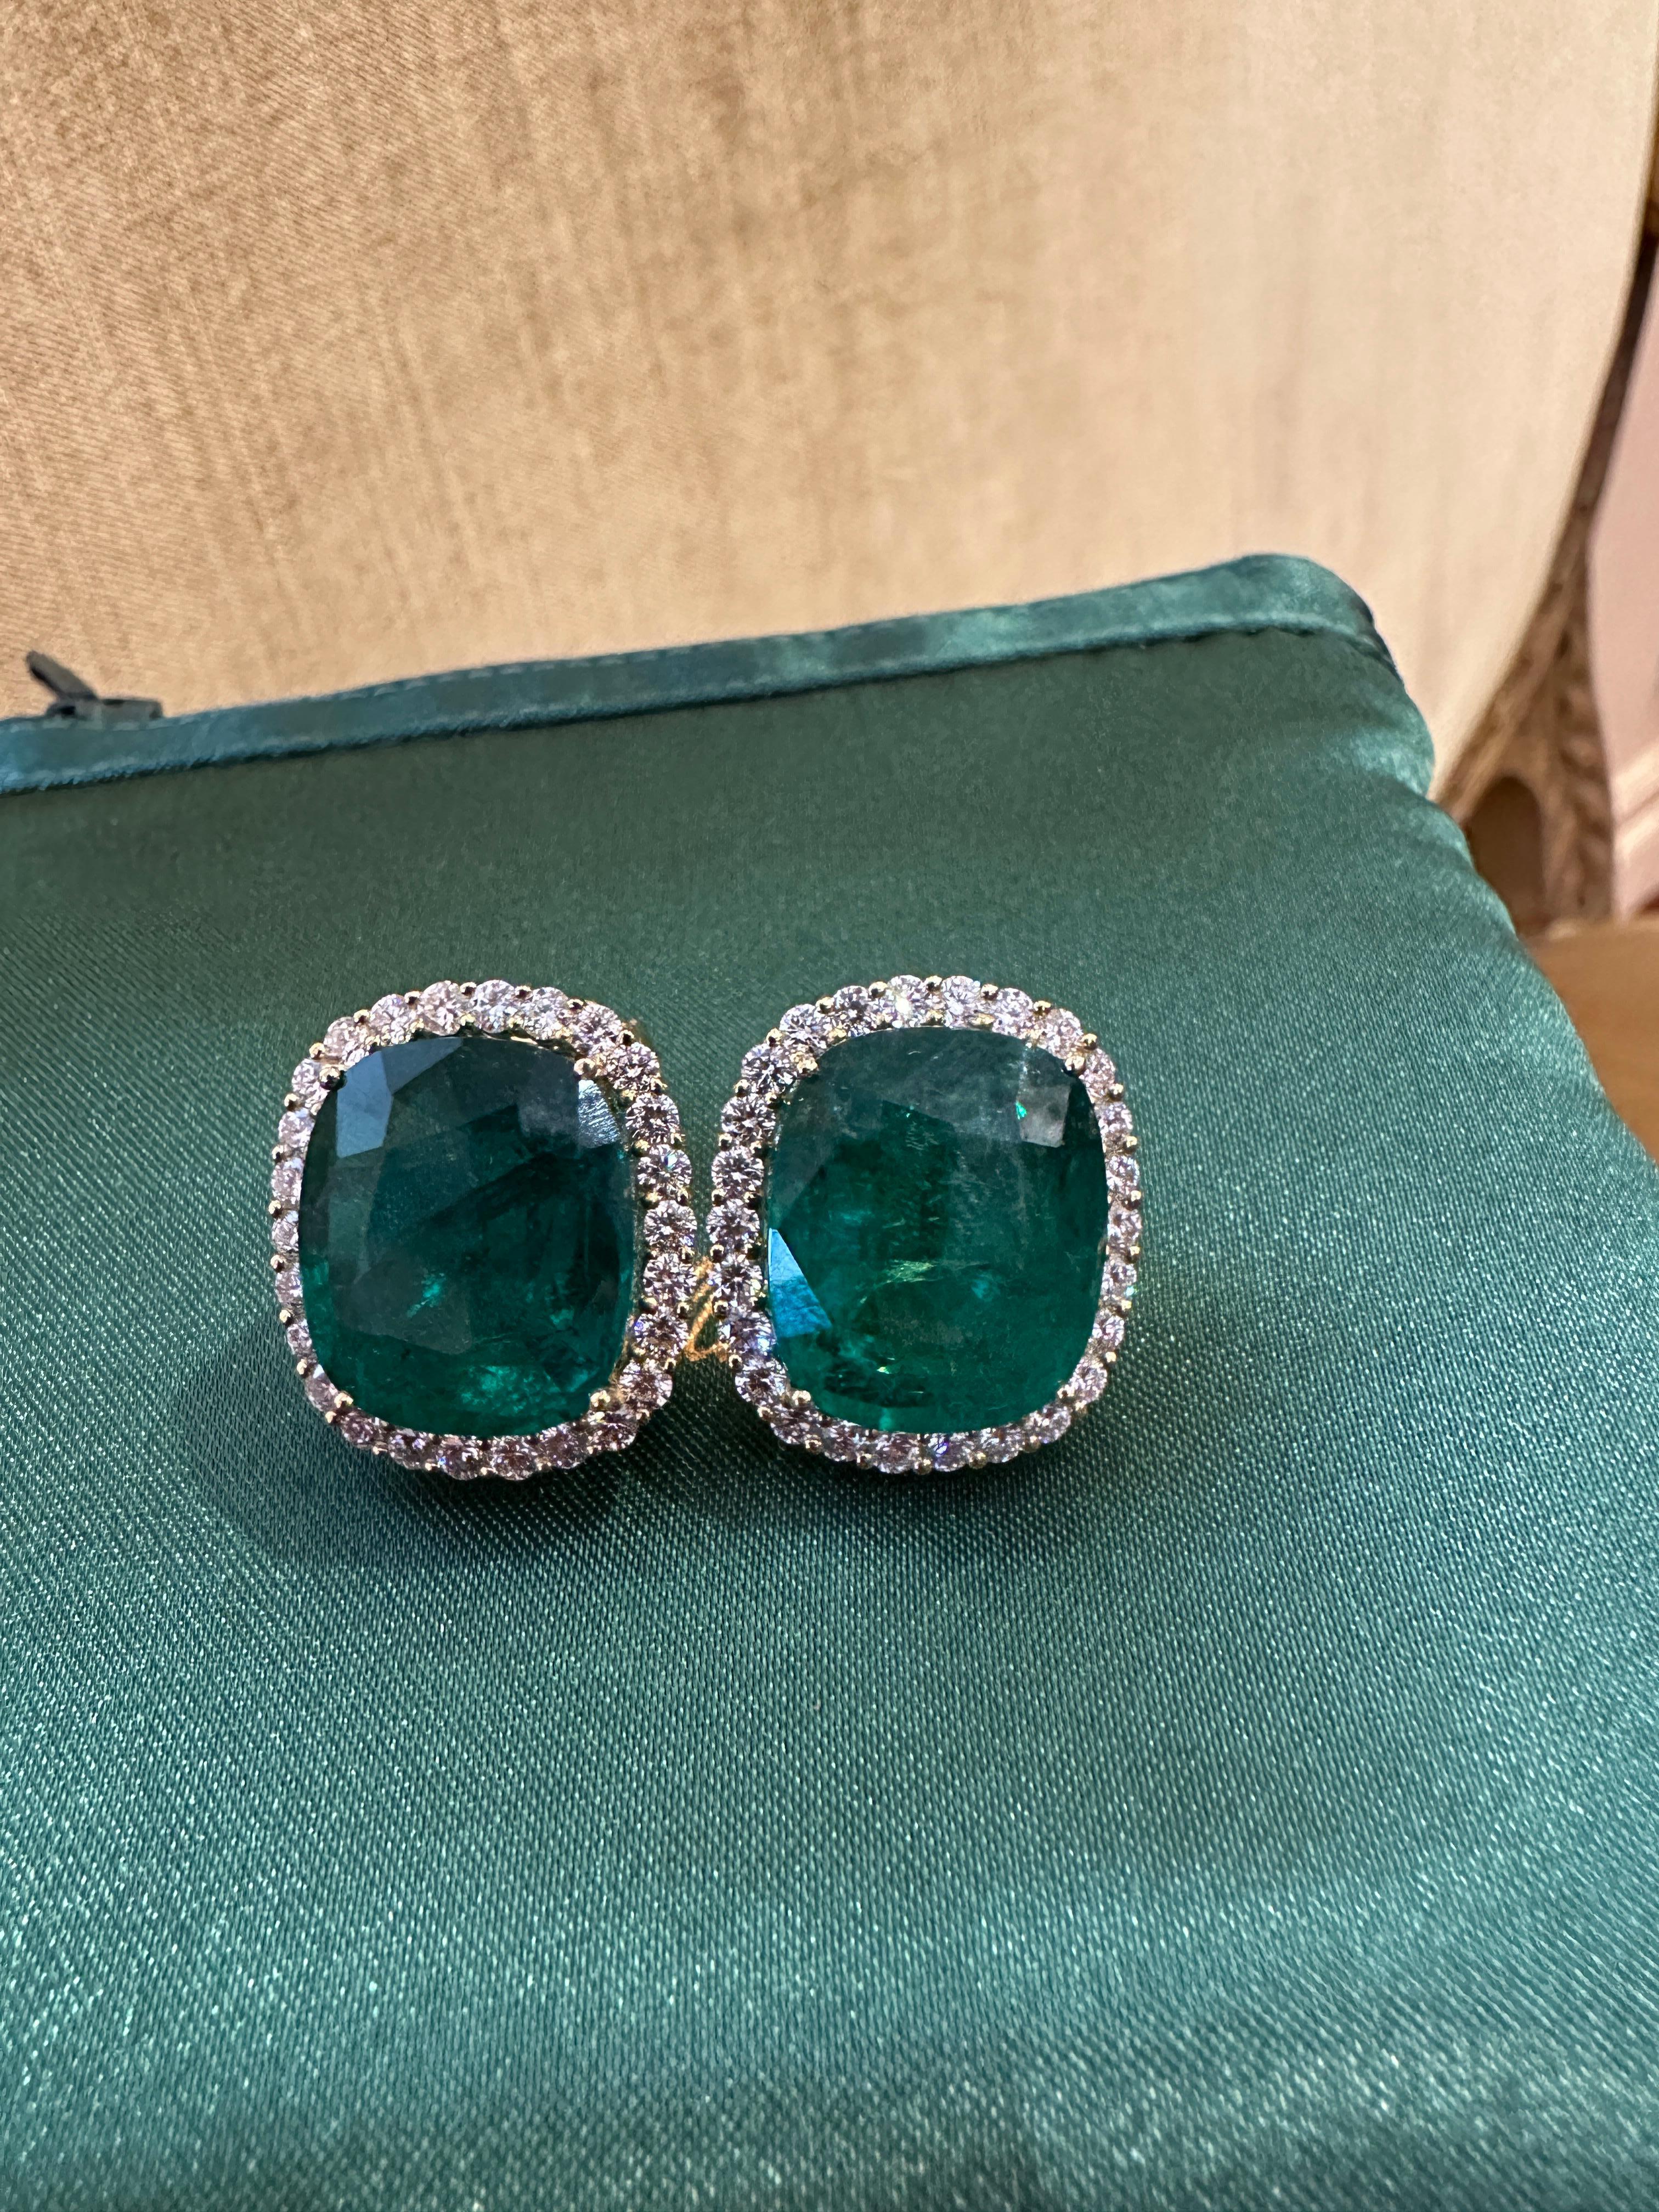 Large Emerald and Diamond Earrings in 18k Yellow Gold
Features
Two Natural Cushion Shaped Emeralds
weighing  29.15 carats total
Measurements:
17.23 x 14.60 x 8.98mm
and
16.80 x 14.58 x 8.05mm

AGL Certified
*See copy of the AGL certificate in the